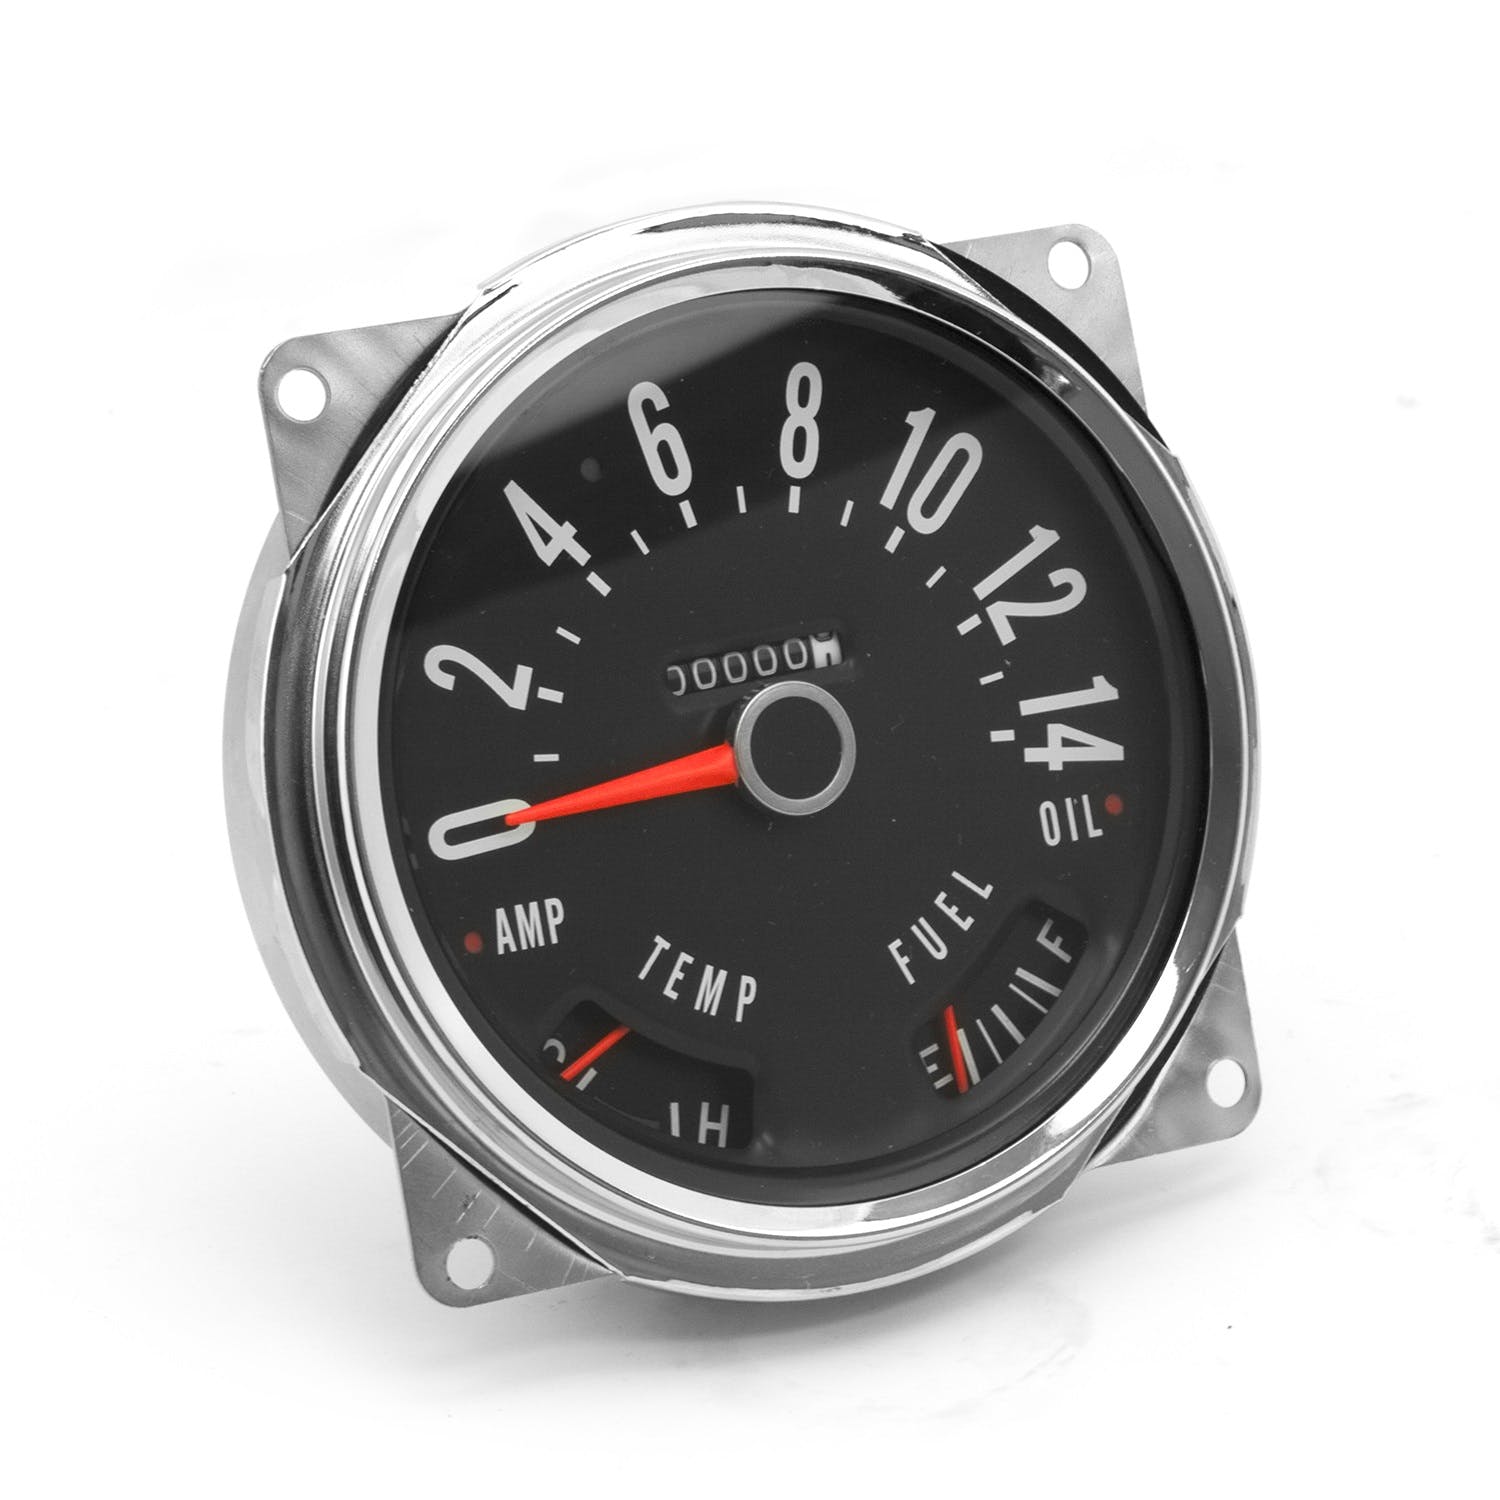 Omix-ADA 17205.02 Speedometer Assembly